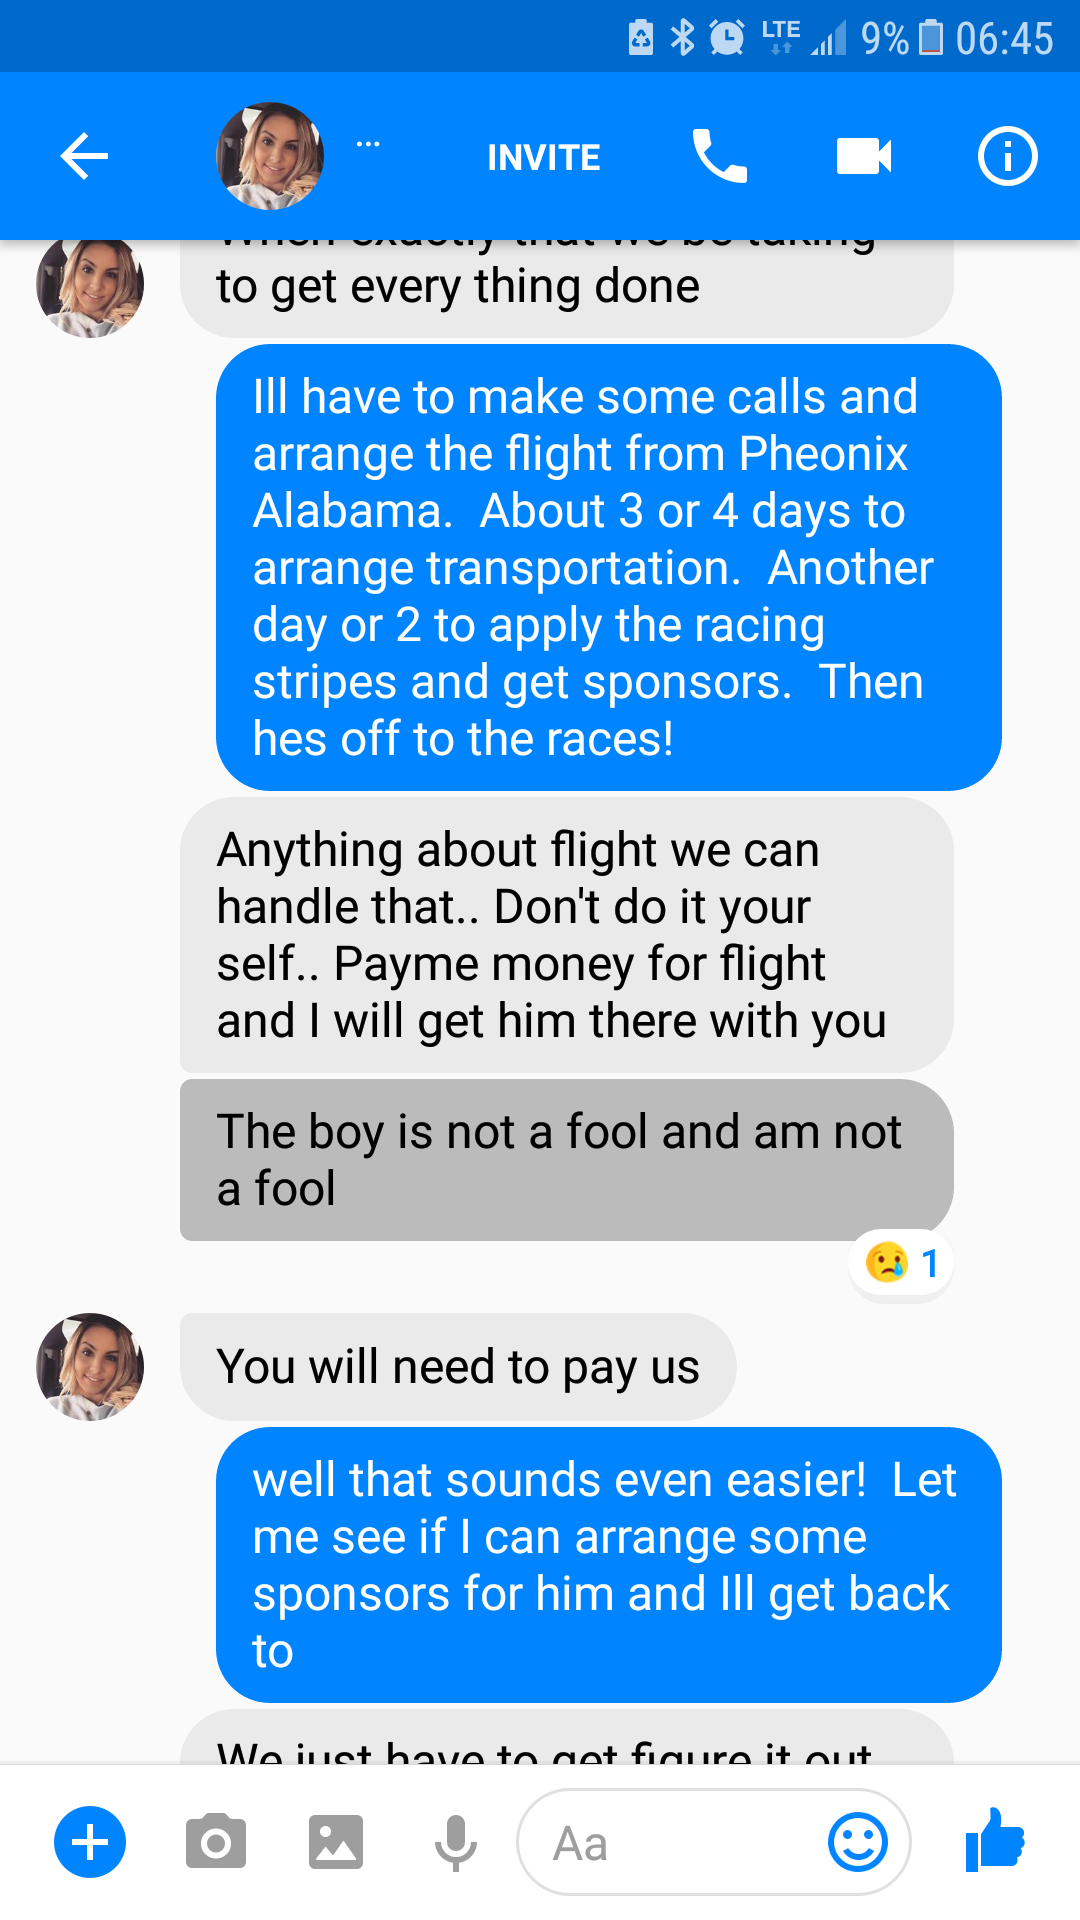 web page - A D Lte 9% 0 Invite Invite K O to get every thing done Ill have to make some calls and arrange the flight from Pheonix Alabama. About 3 or 4 days to arrange transportation. Another day or 2 to apply the racing stripes and get sponsors. Then hes